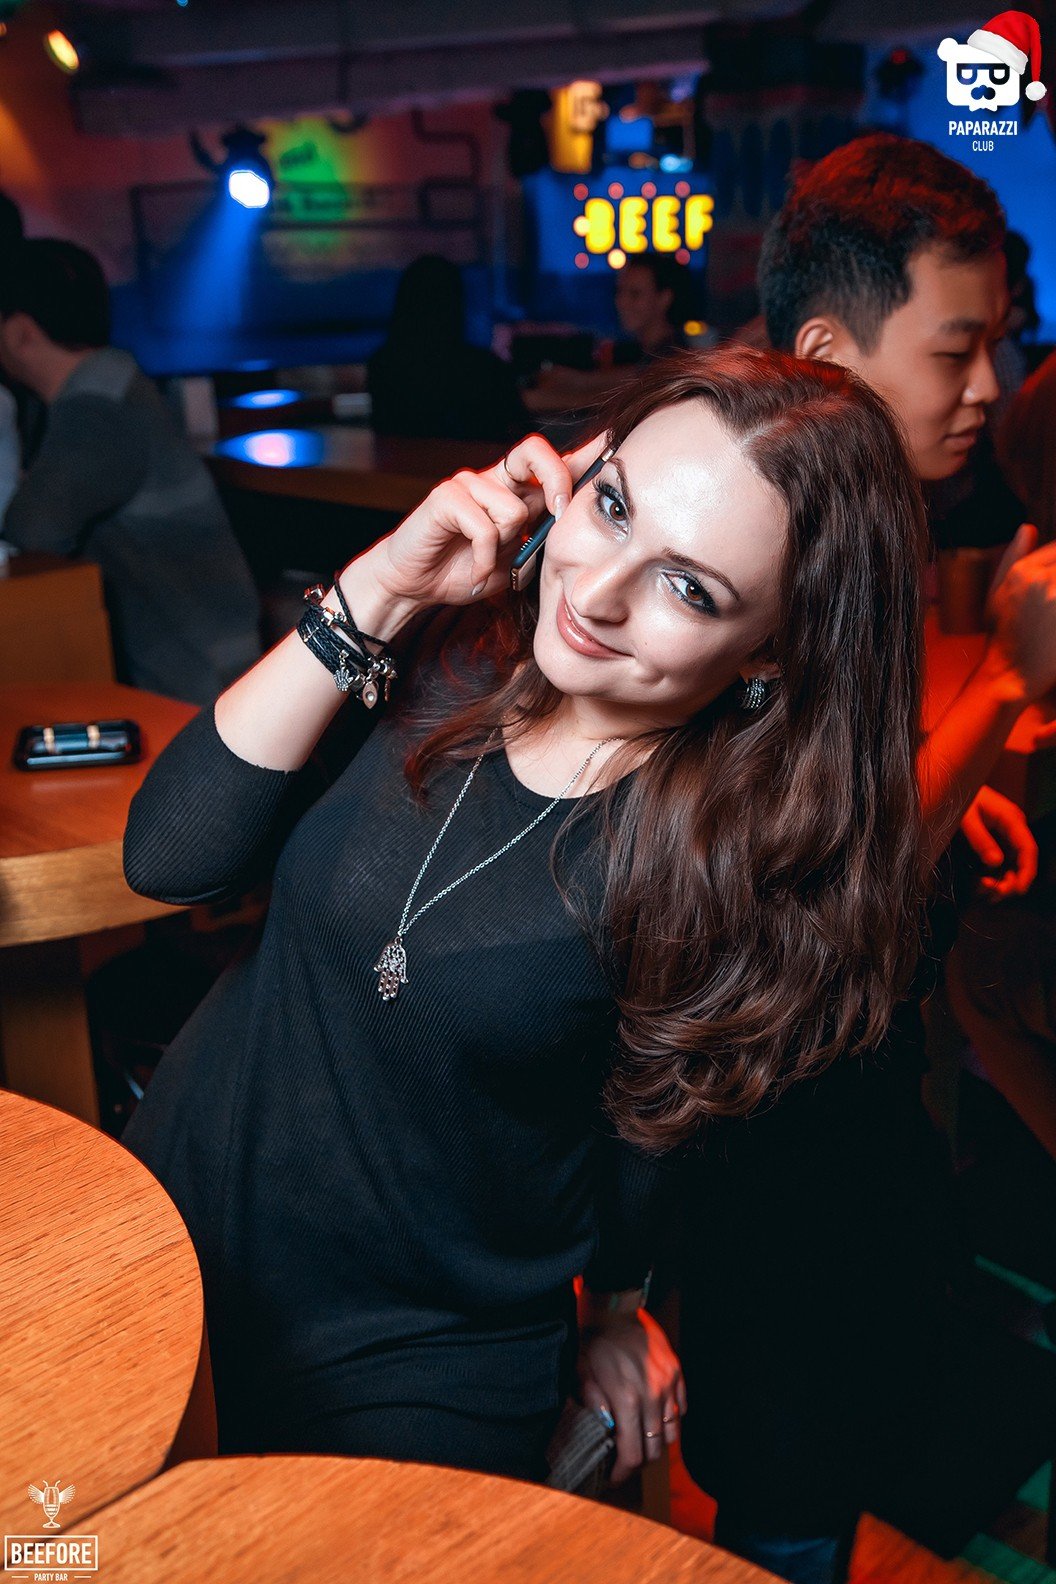 Sales Drive | Bacardi Party Beefore Almaty